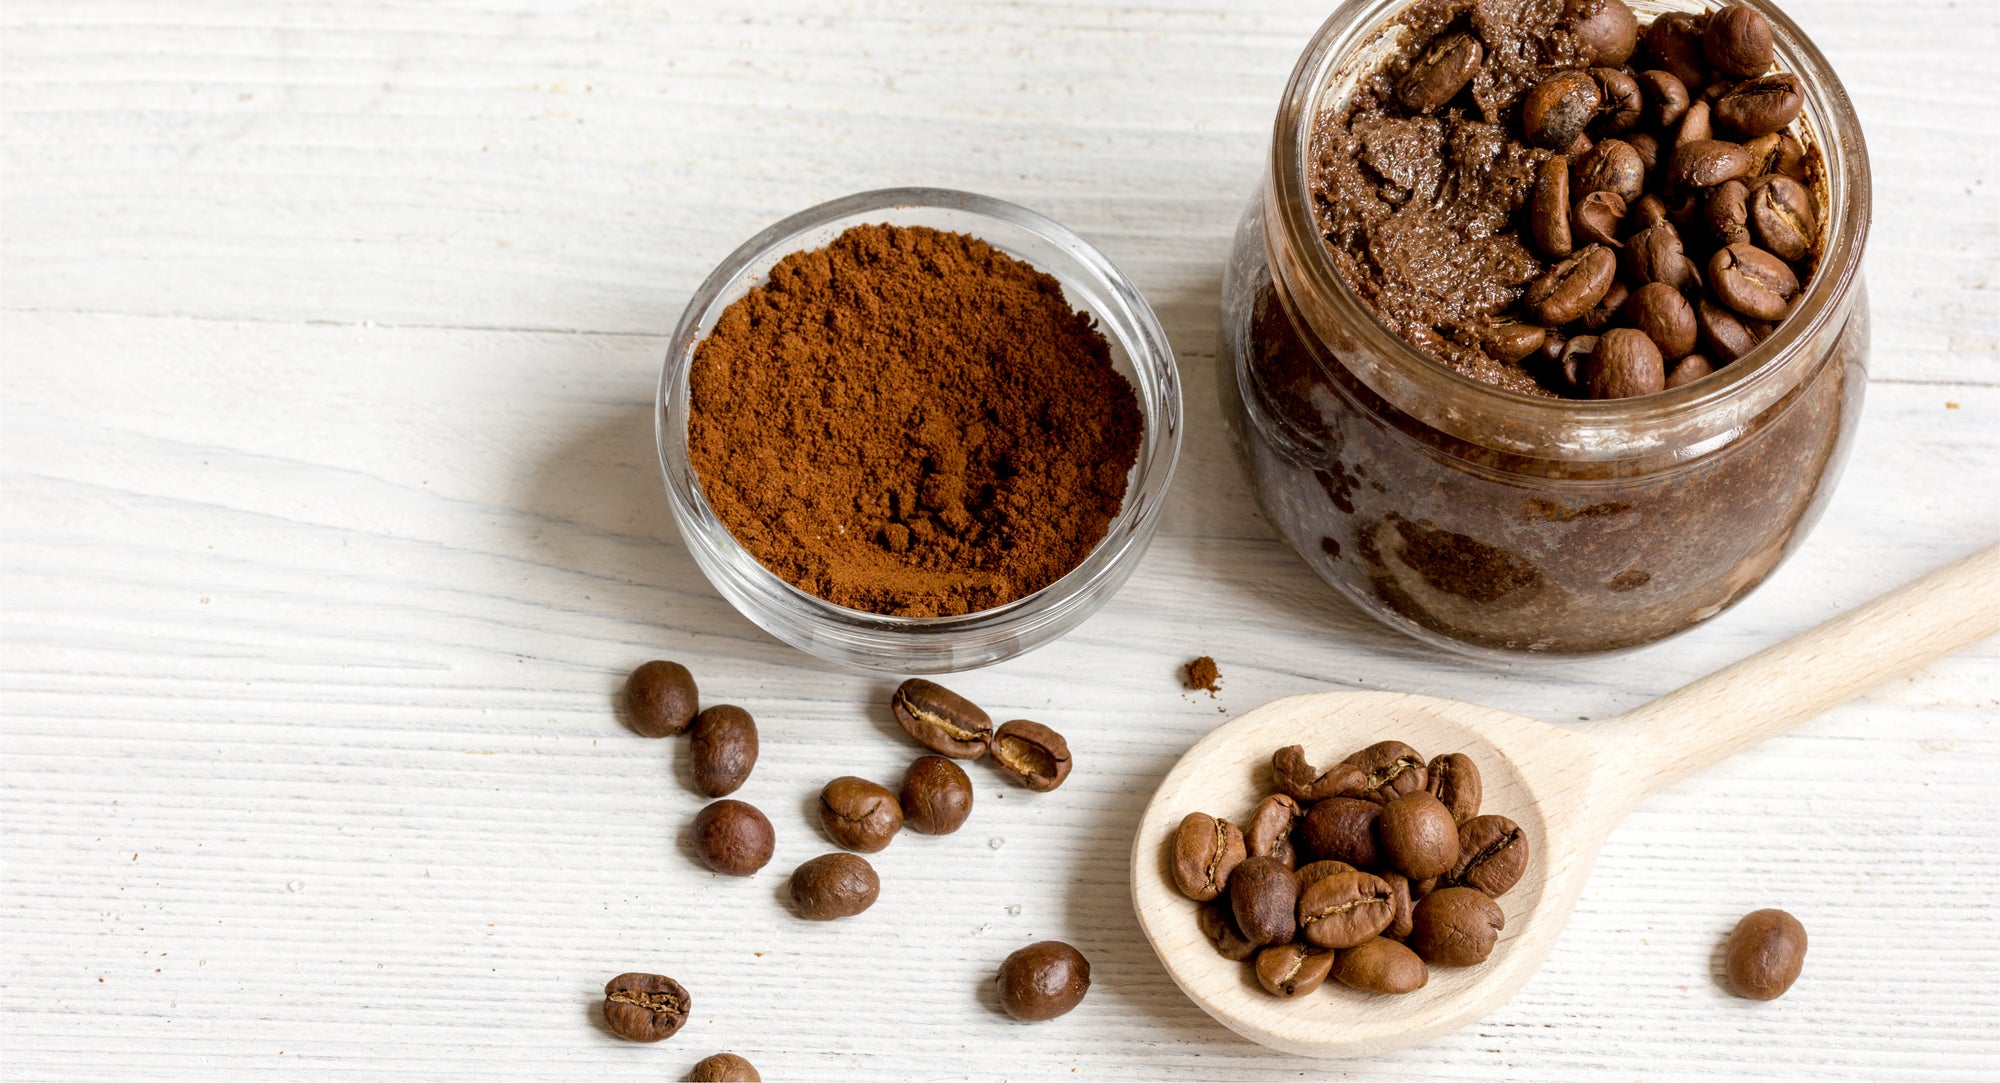 Caffeine is rich in antioxidants which can reduce the sign of aging when used in skincare products.